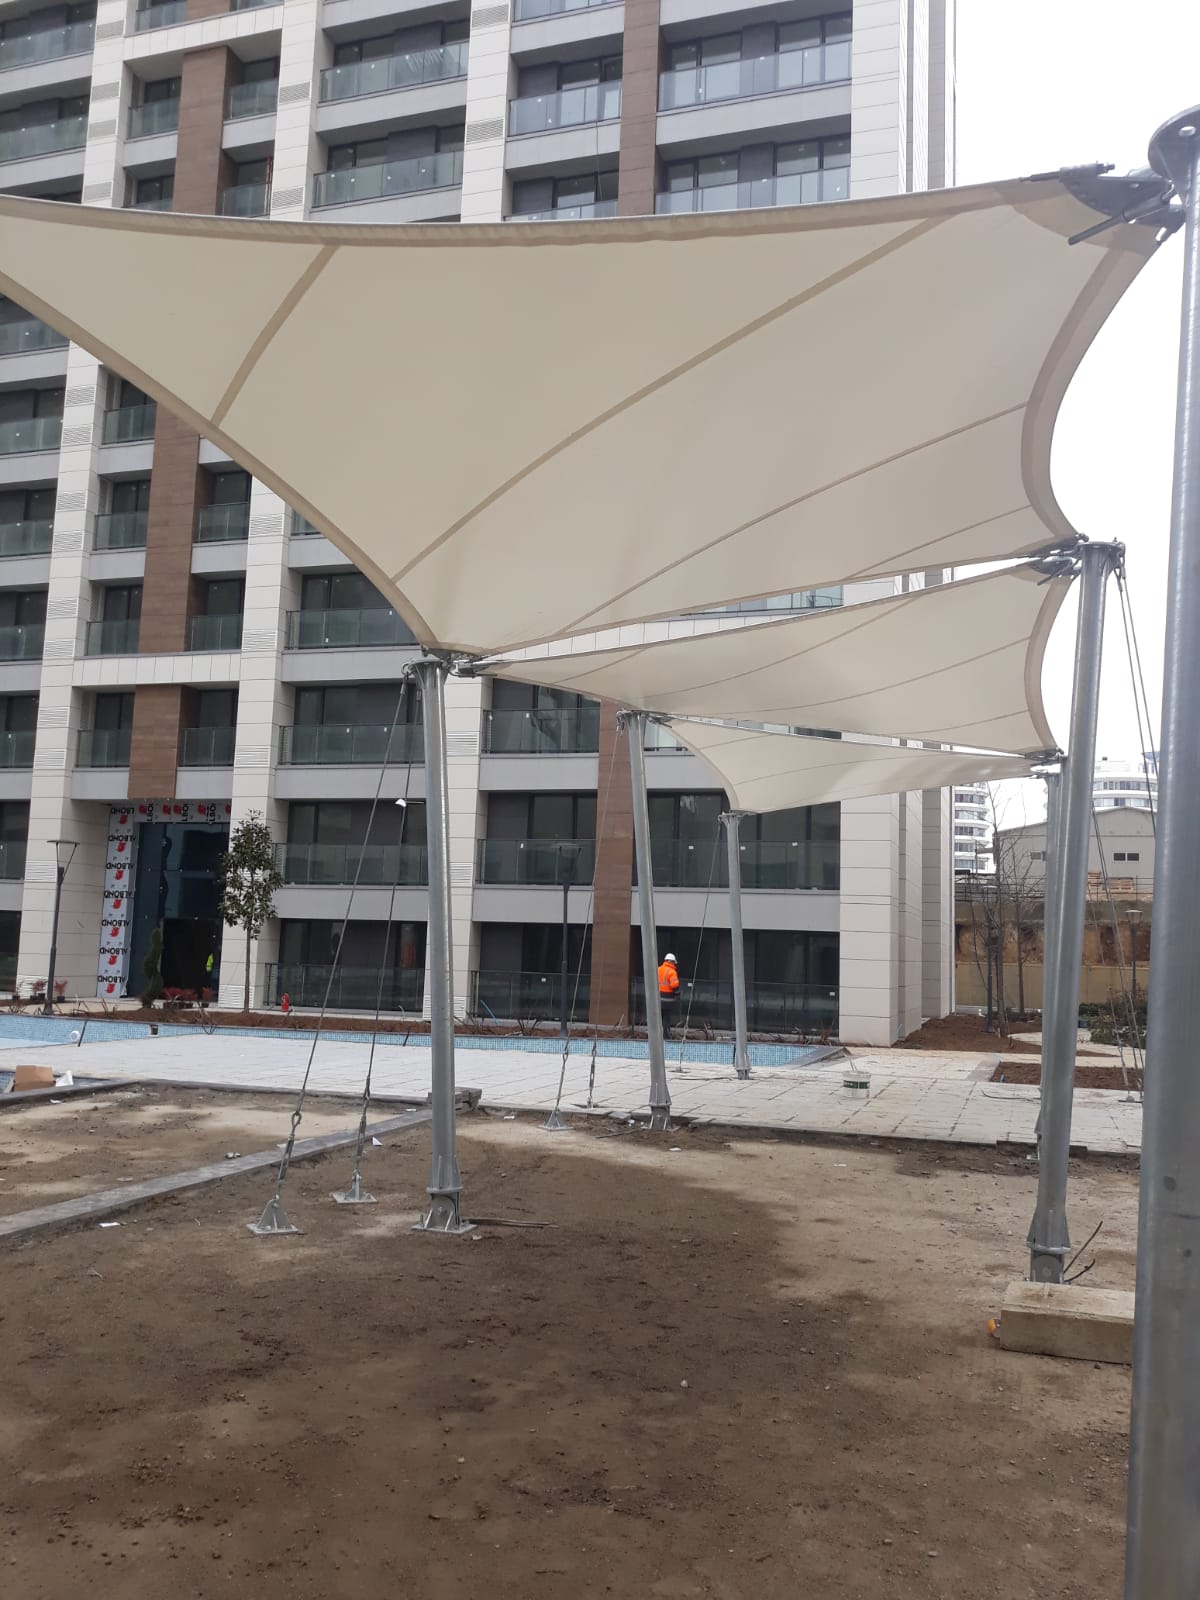 İSTANBUL HOUSING TENSILE STRUCTURE